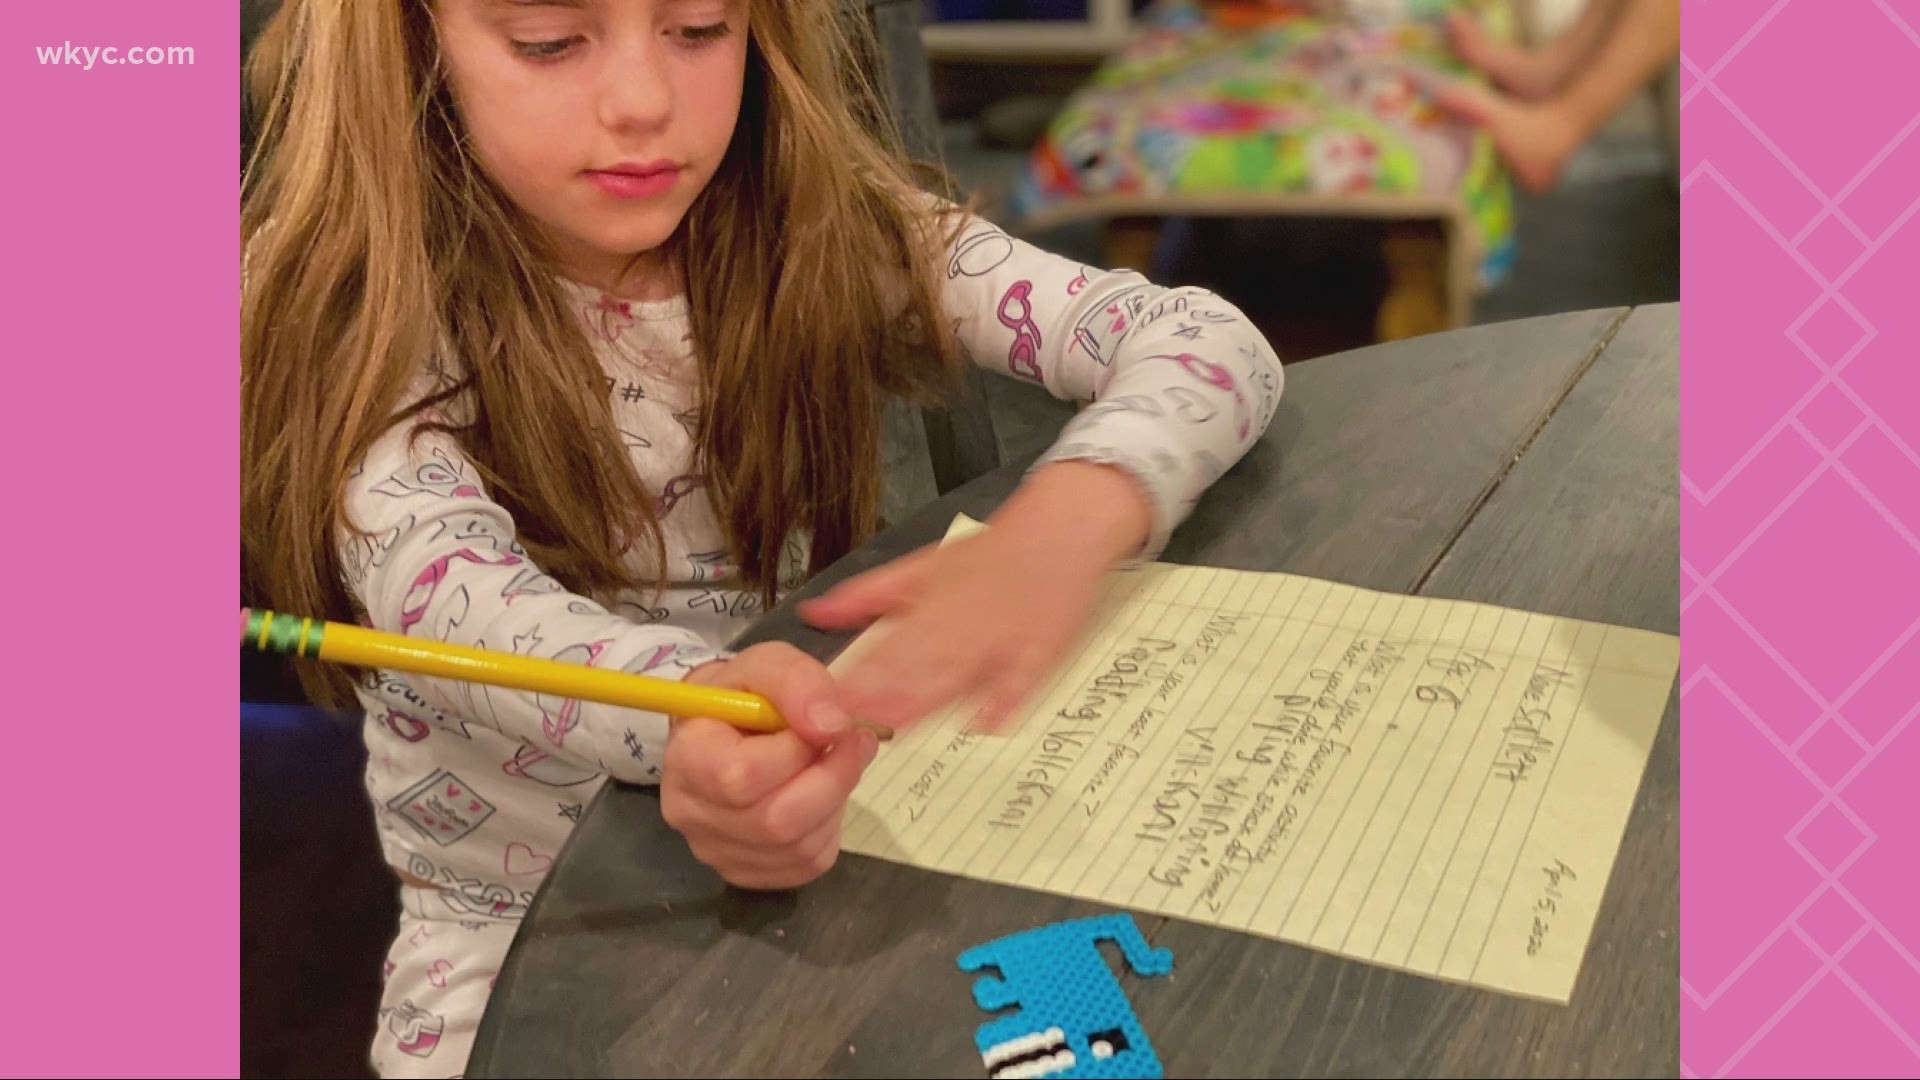 One day, we will look back on this time with our families and smile. Maureen Kyle shows us how to make a time capsule with your kids to hold onto the good memories.